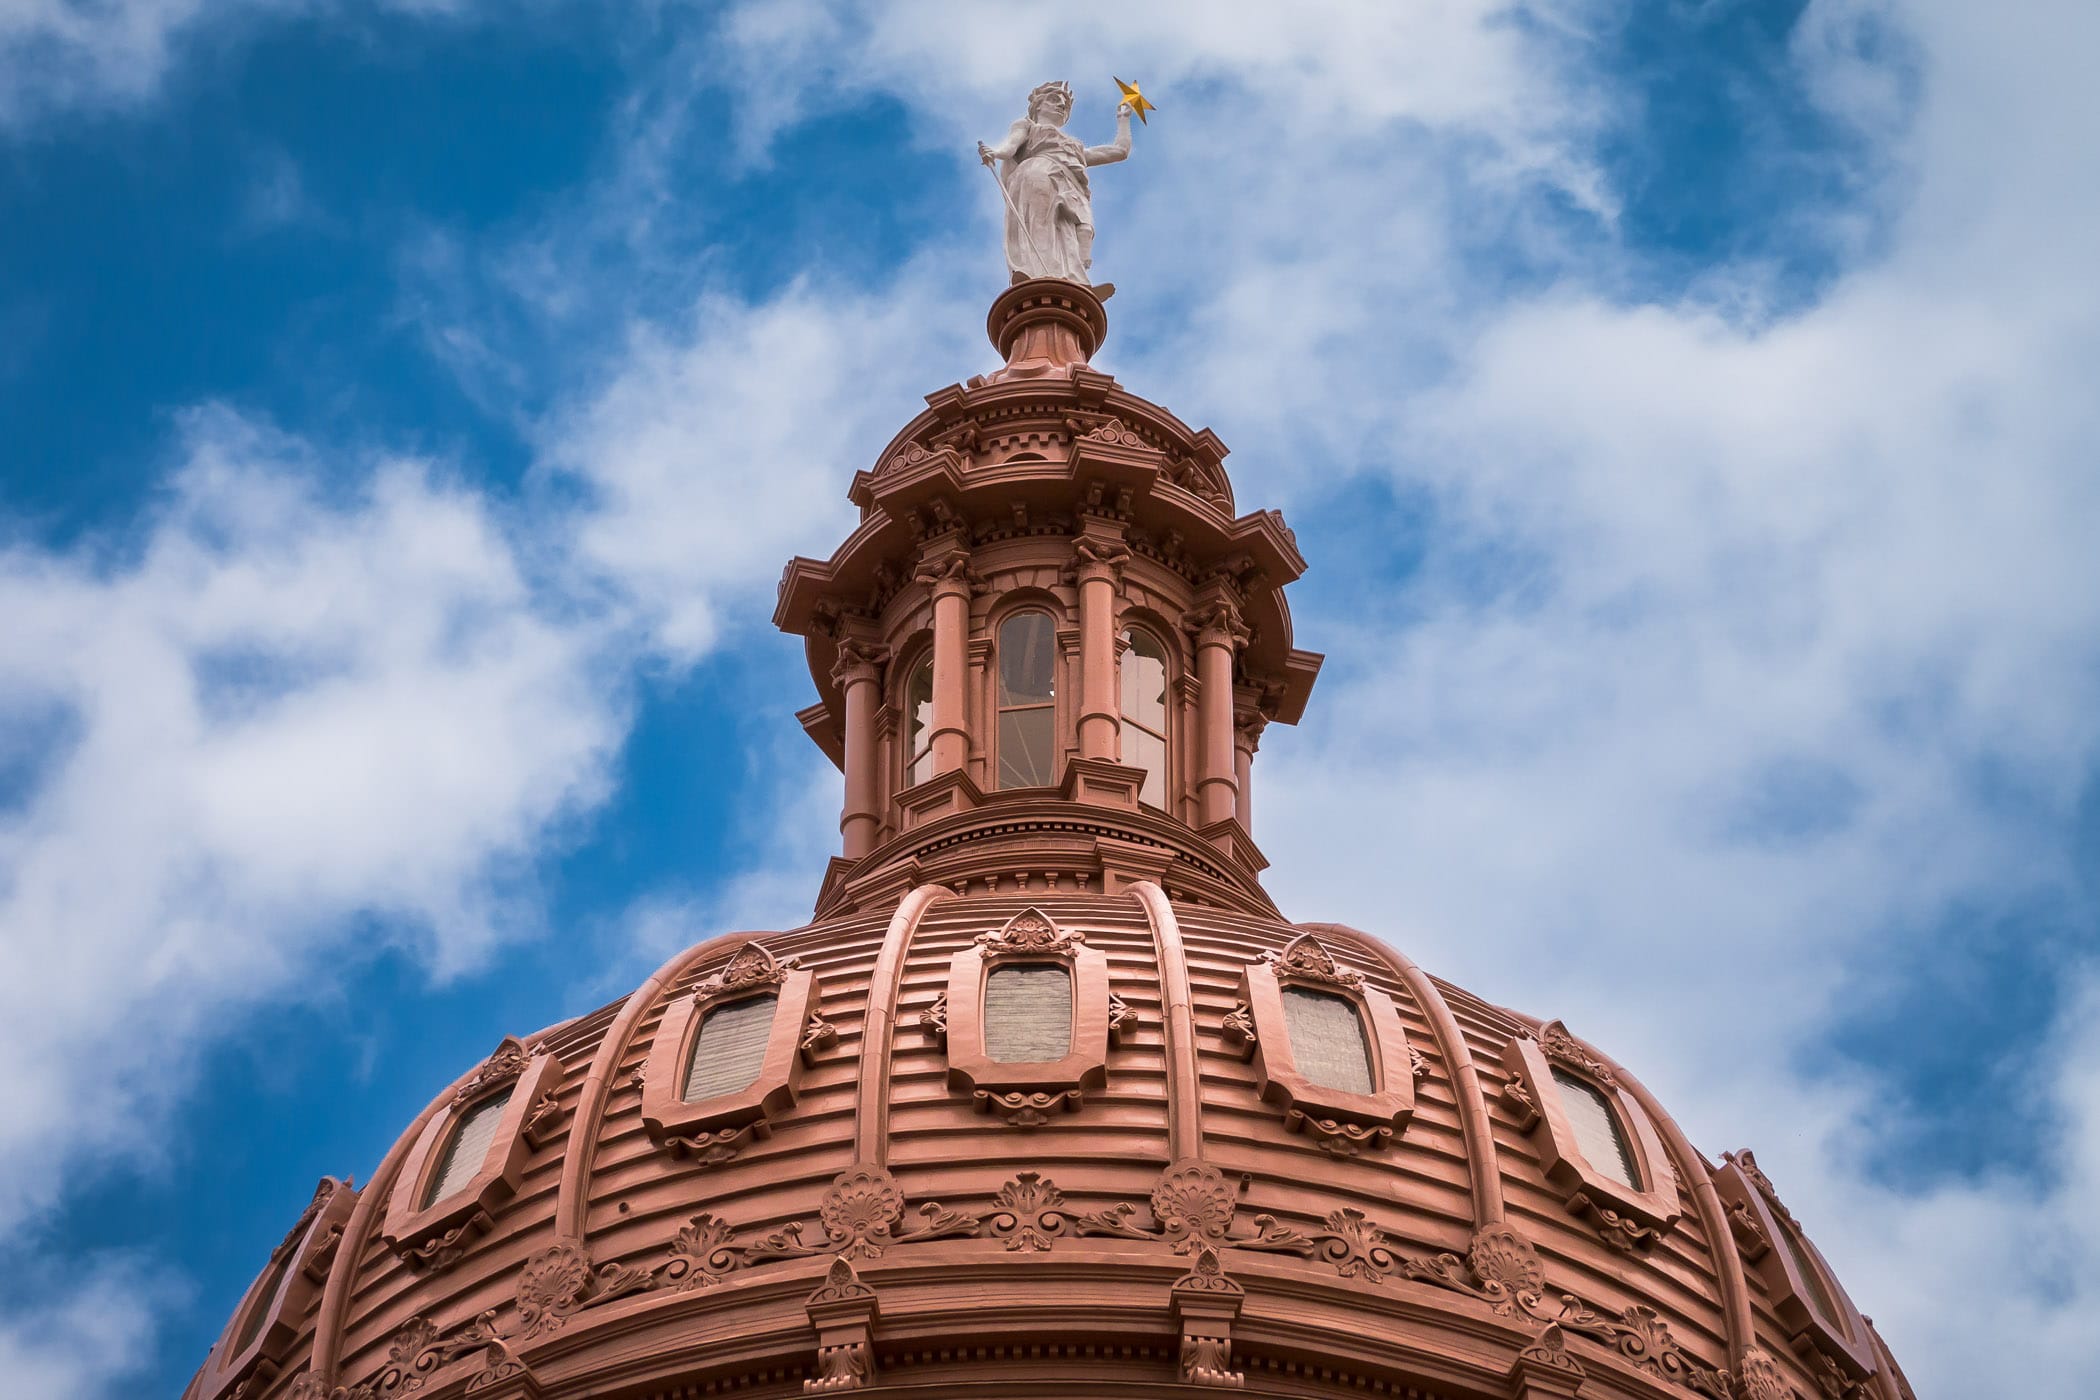 The Goddess of Liberty statue atop the 308-foot-tall dome of the Texas State Capitol, Austin.